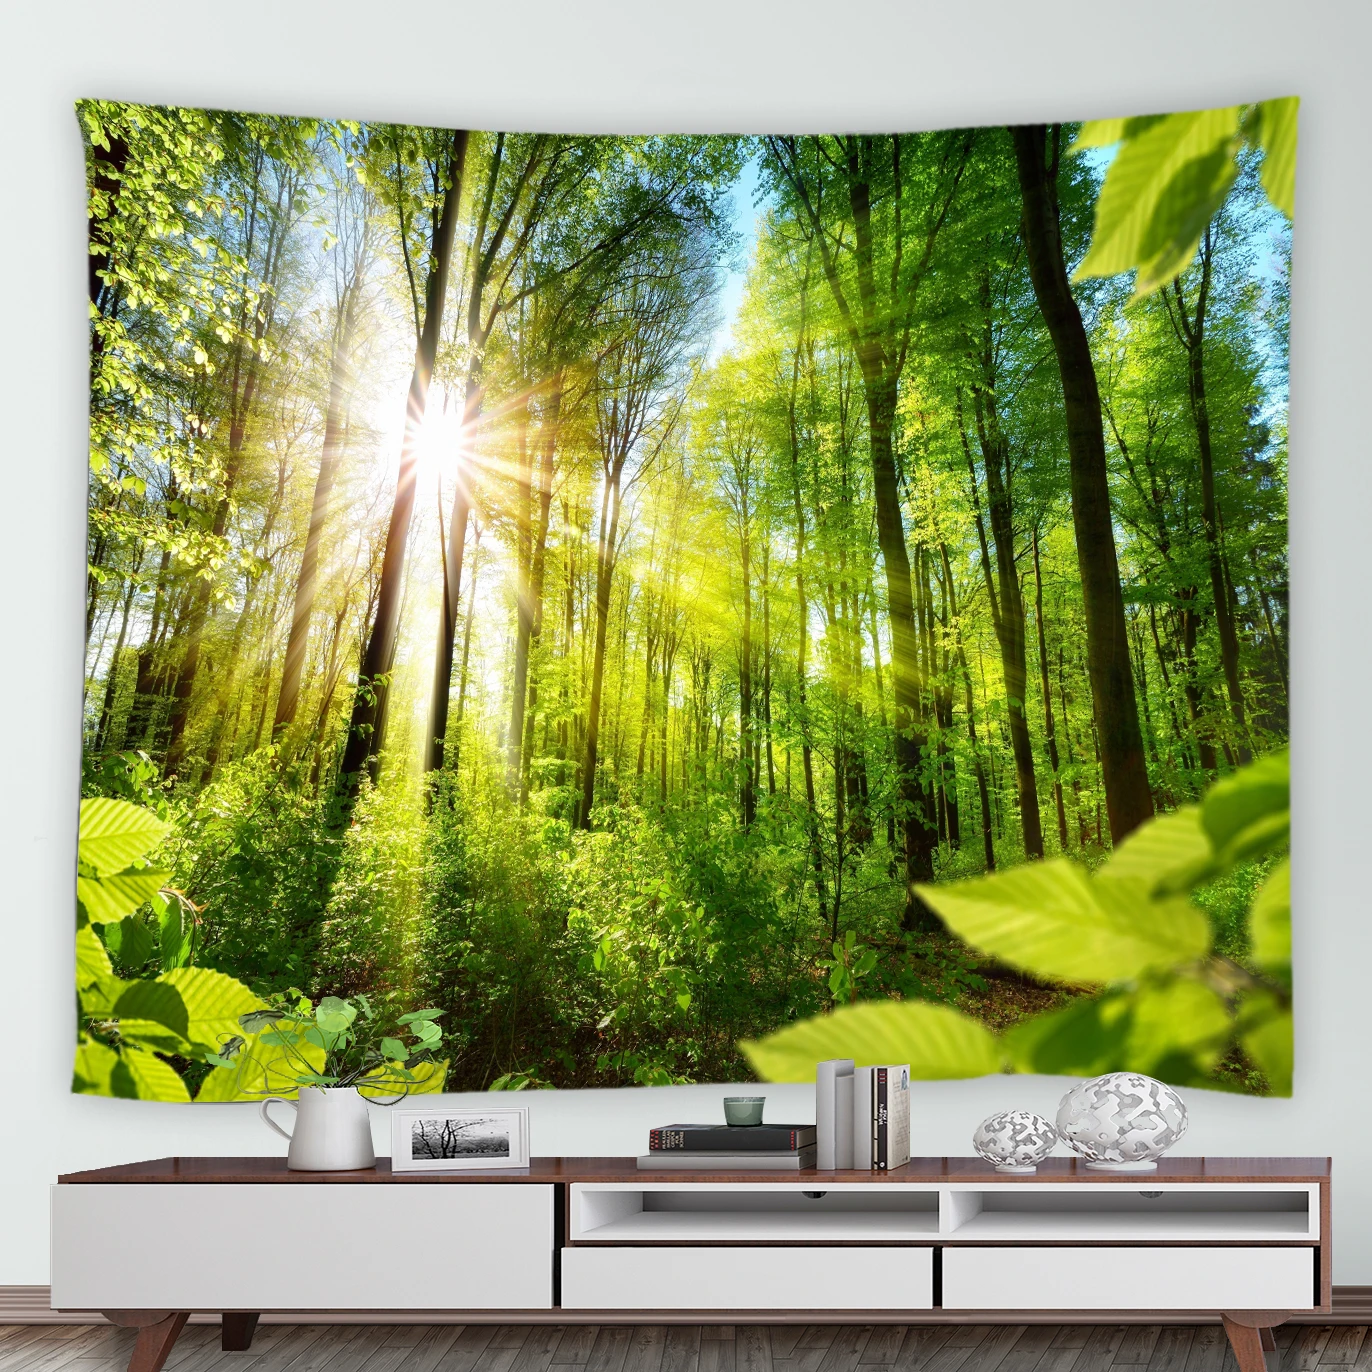 

Spring Green Forest Tapestry Sunlight Plants Natural Landscape Tapestries Home Dorm Study Room Decor Wall Hanging Mural Blanket